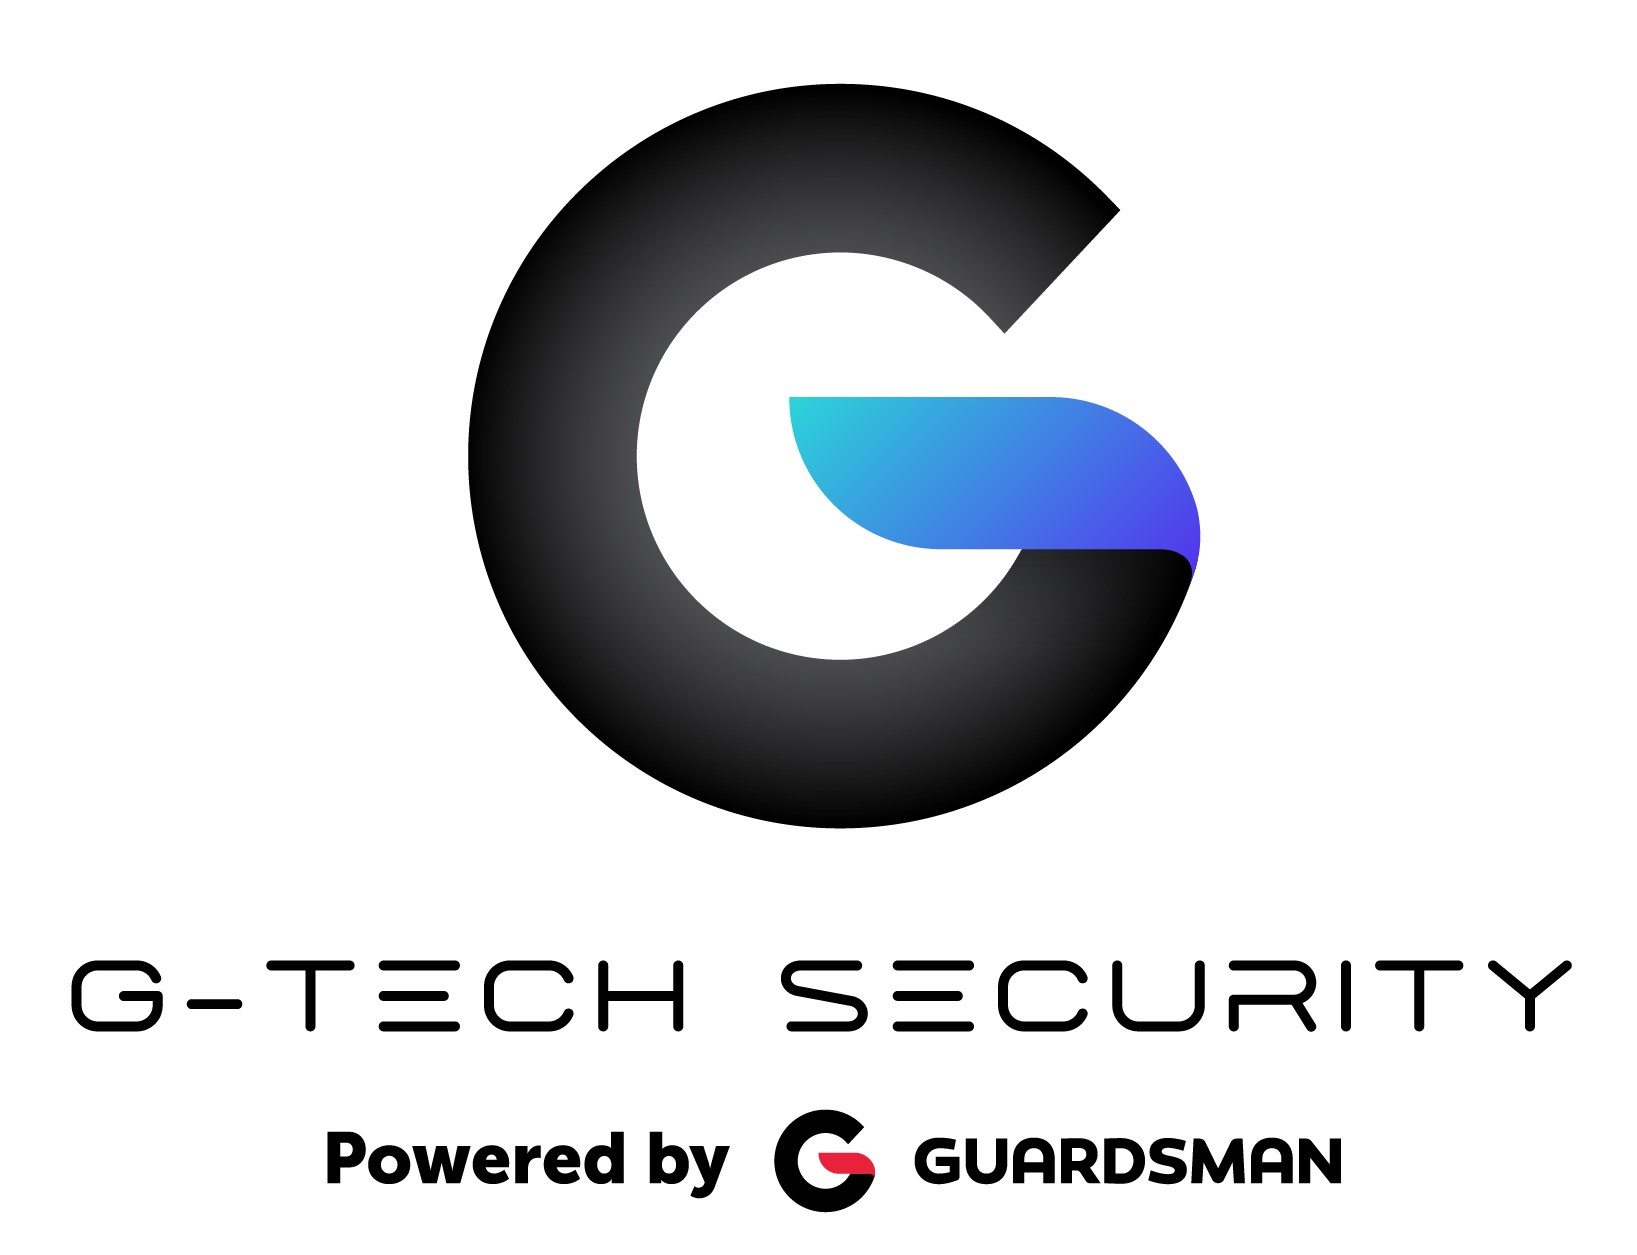 G-Tech Security Limited